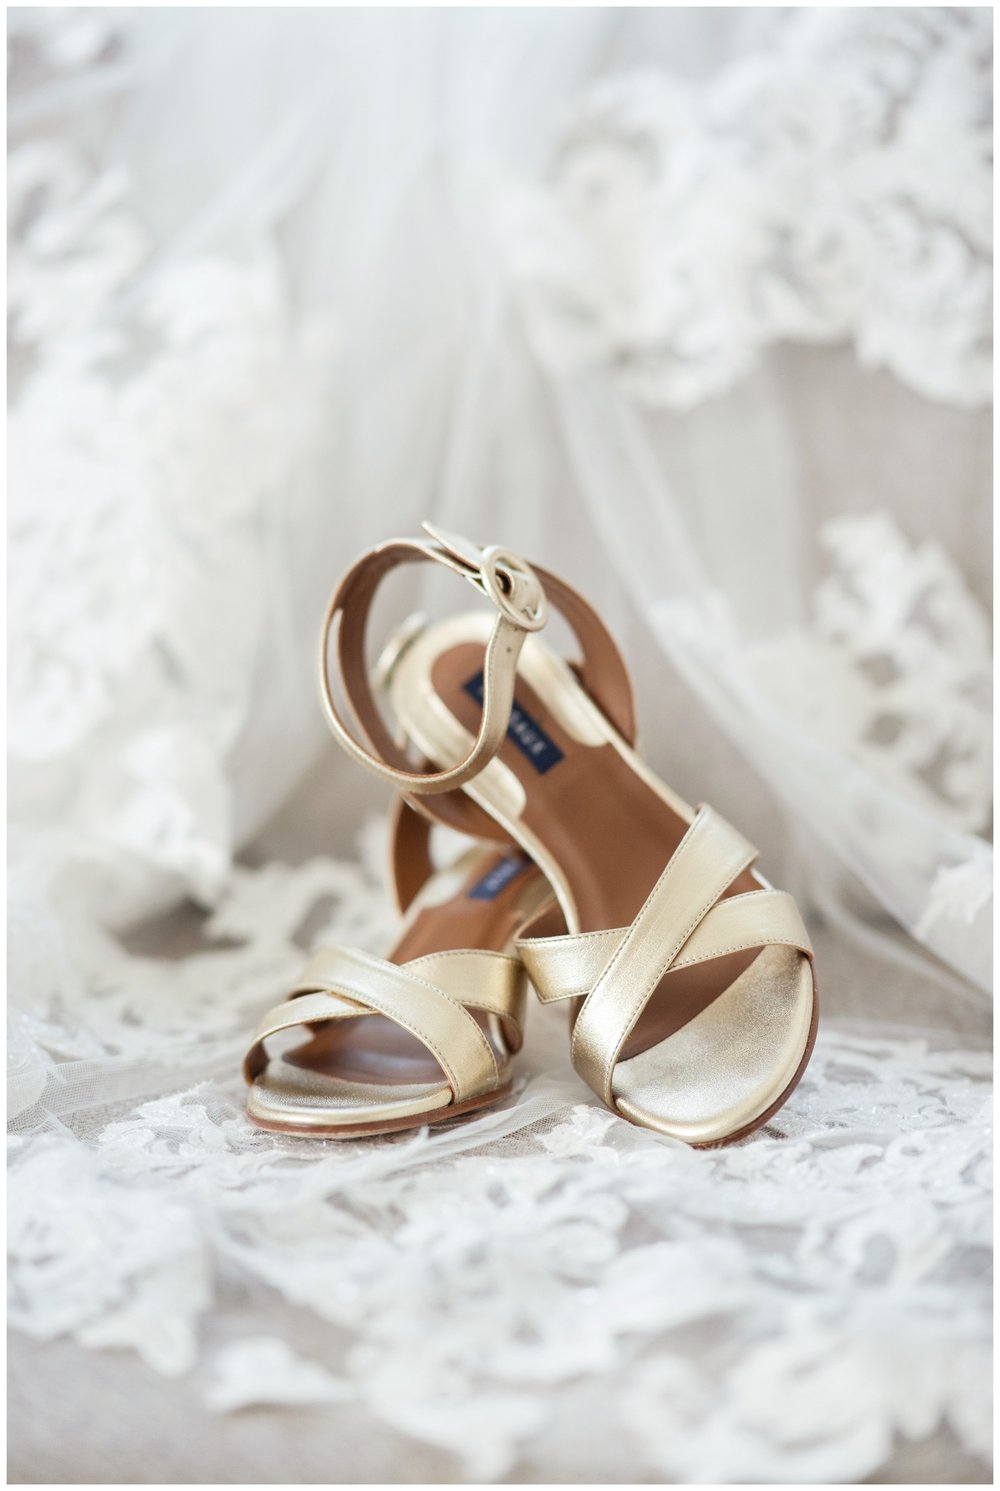 cream wedding shoes on lace veil